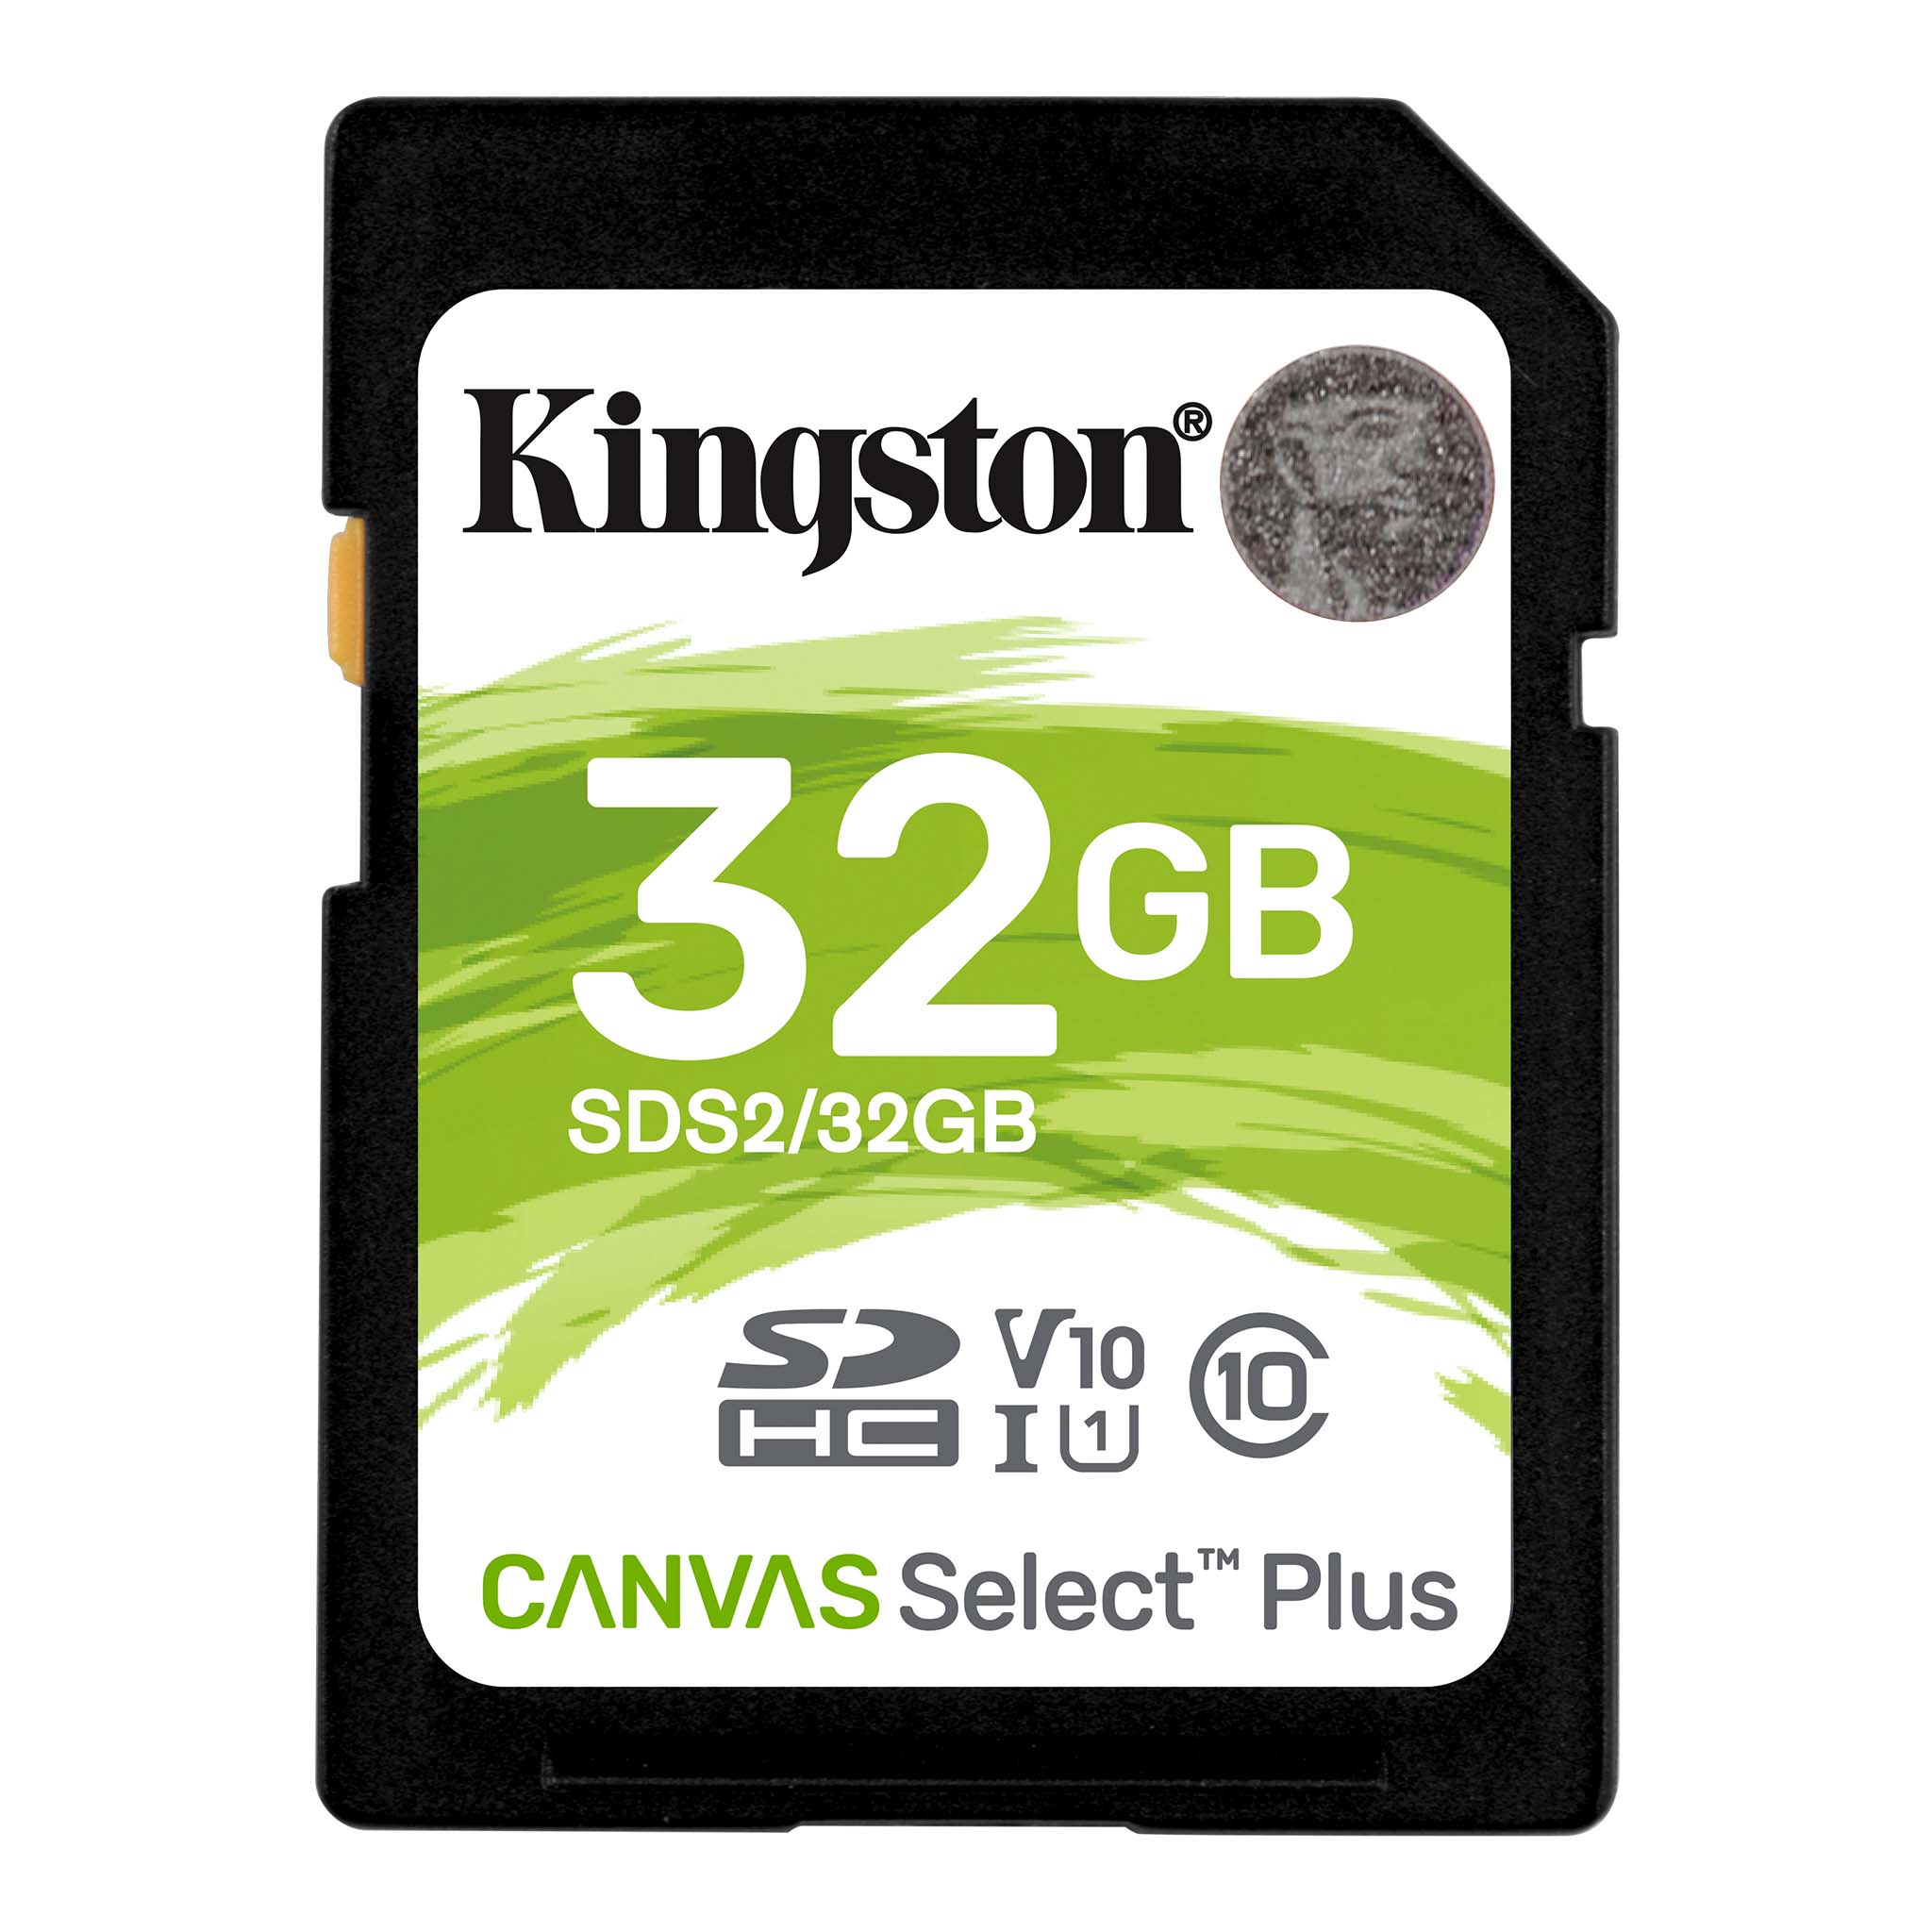 100MBs Works with Kingston Kingston 128GB Honor View 10 MicroSDXC Canvas Select Plus Card Verified by SanFlash. 